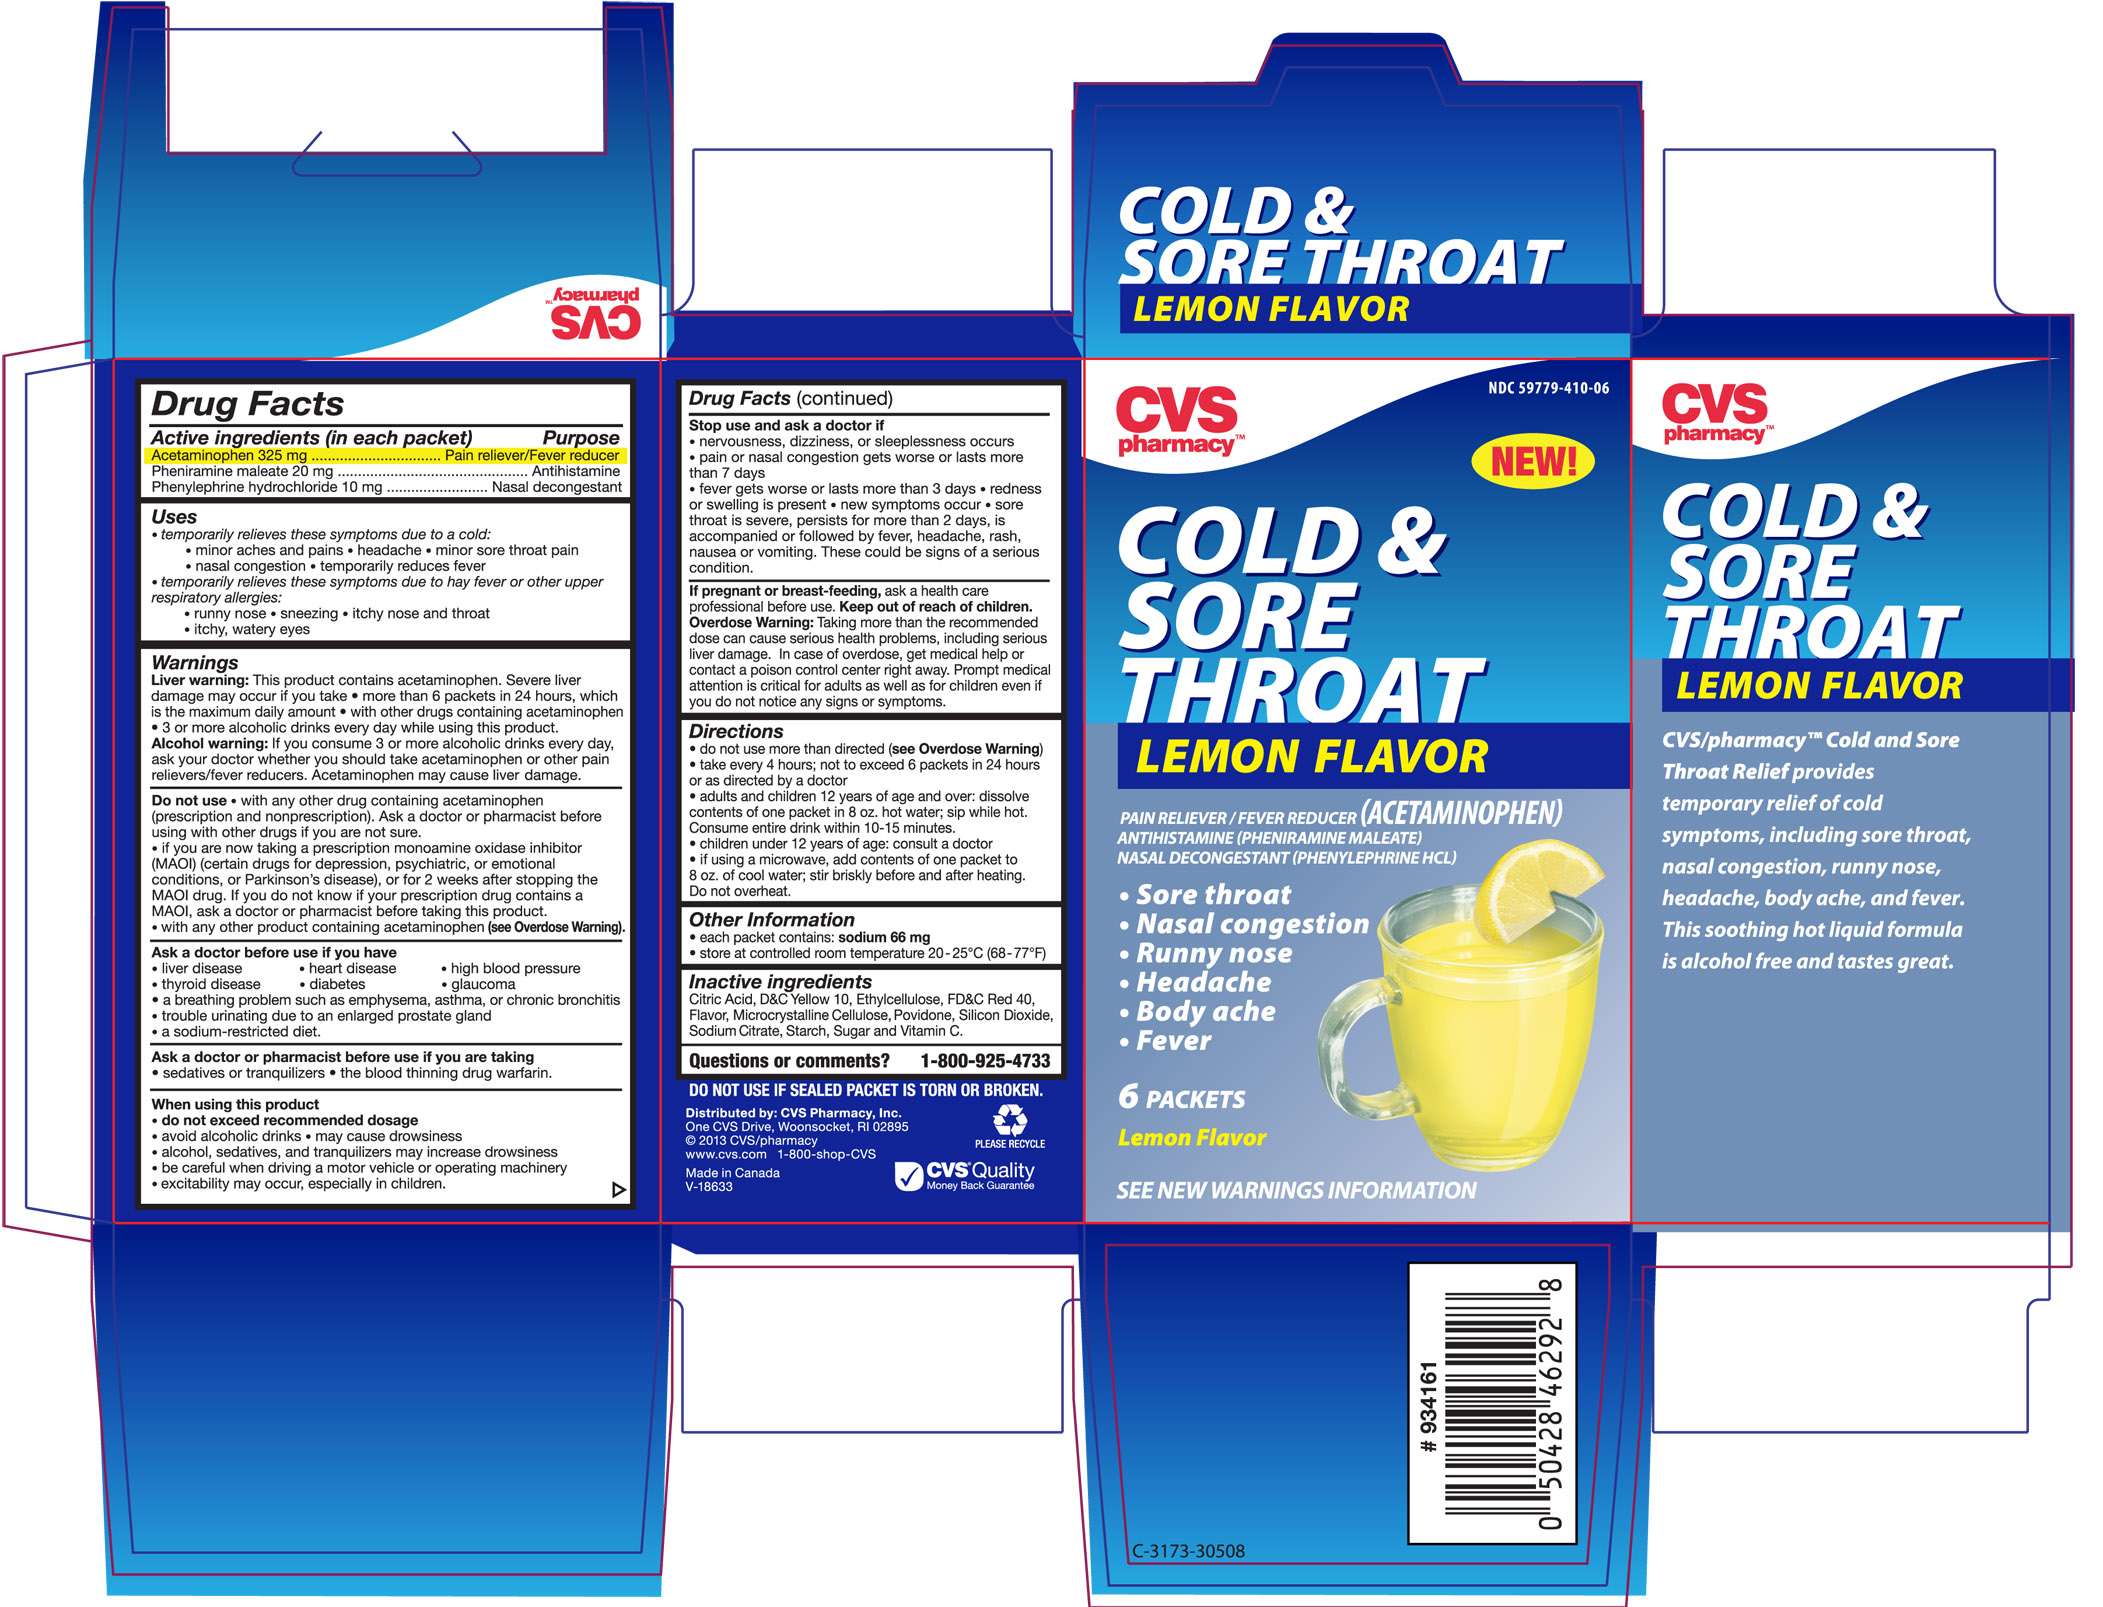 CVS Pharmacy Cold and Sore Throat